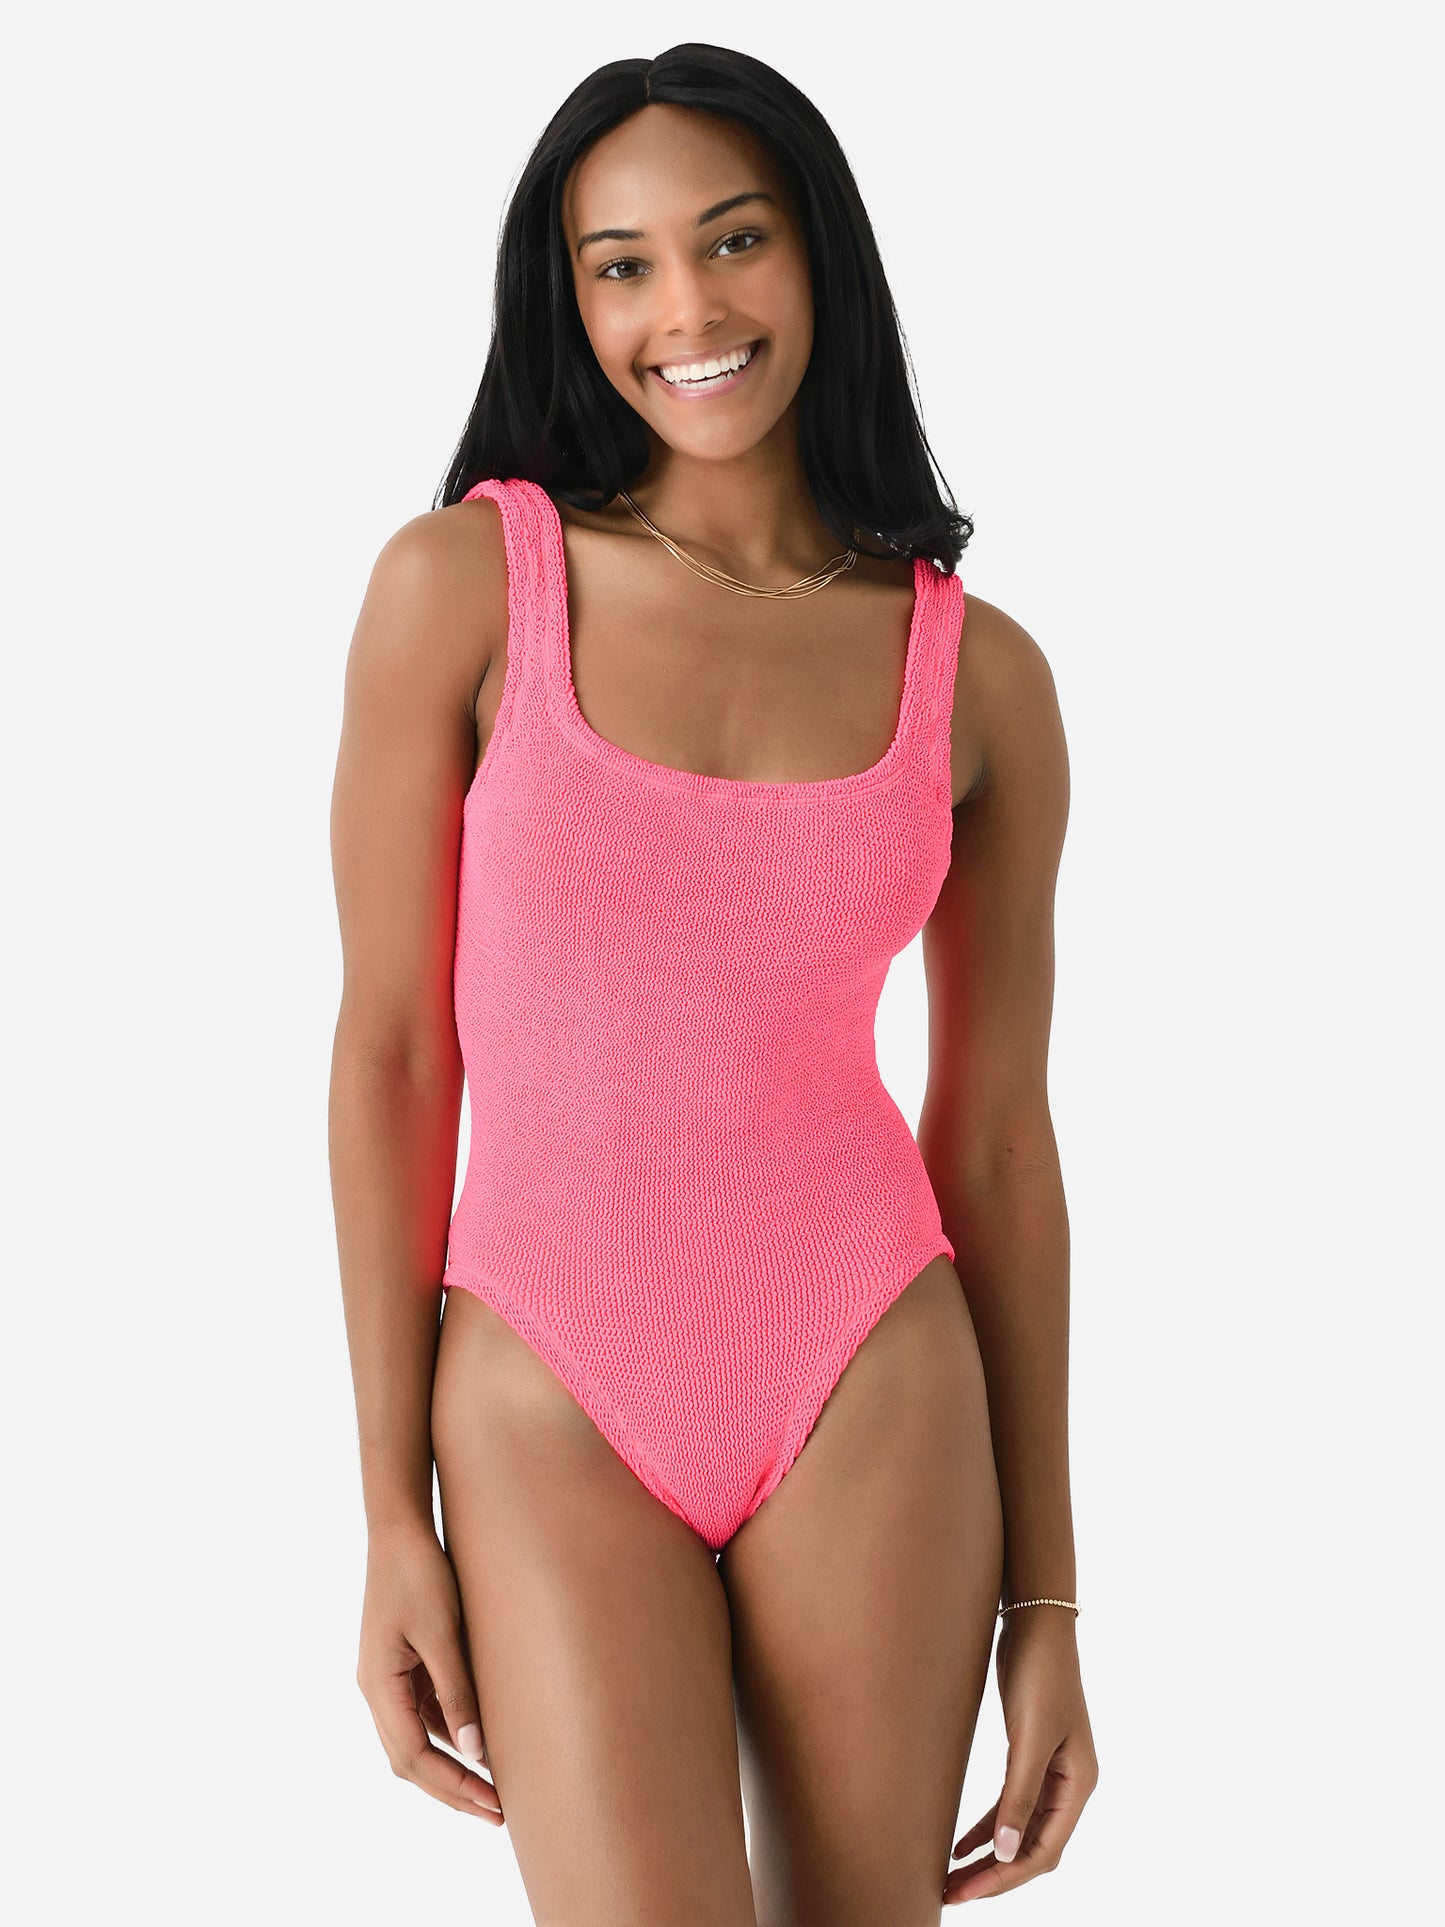 Hunza G Women's Square Neck One-Piece Swimsuit